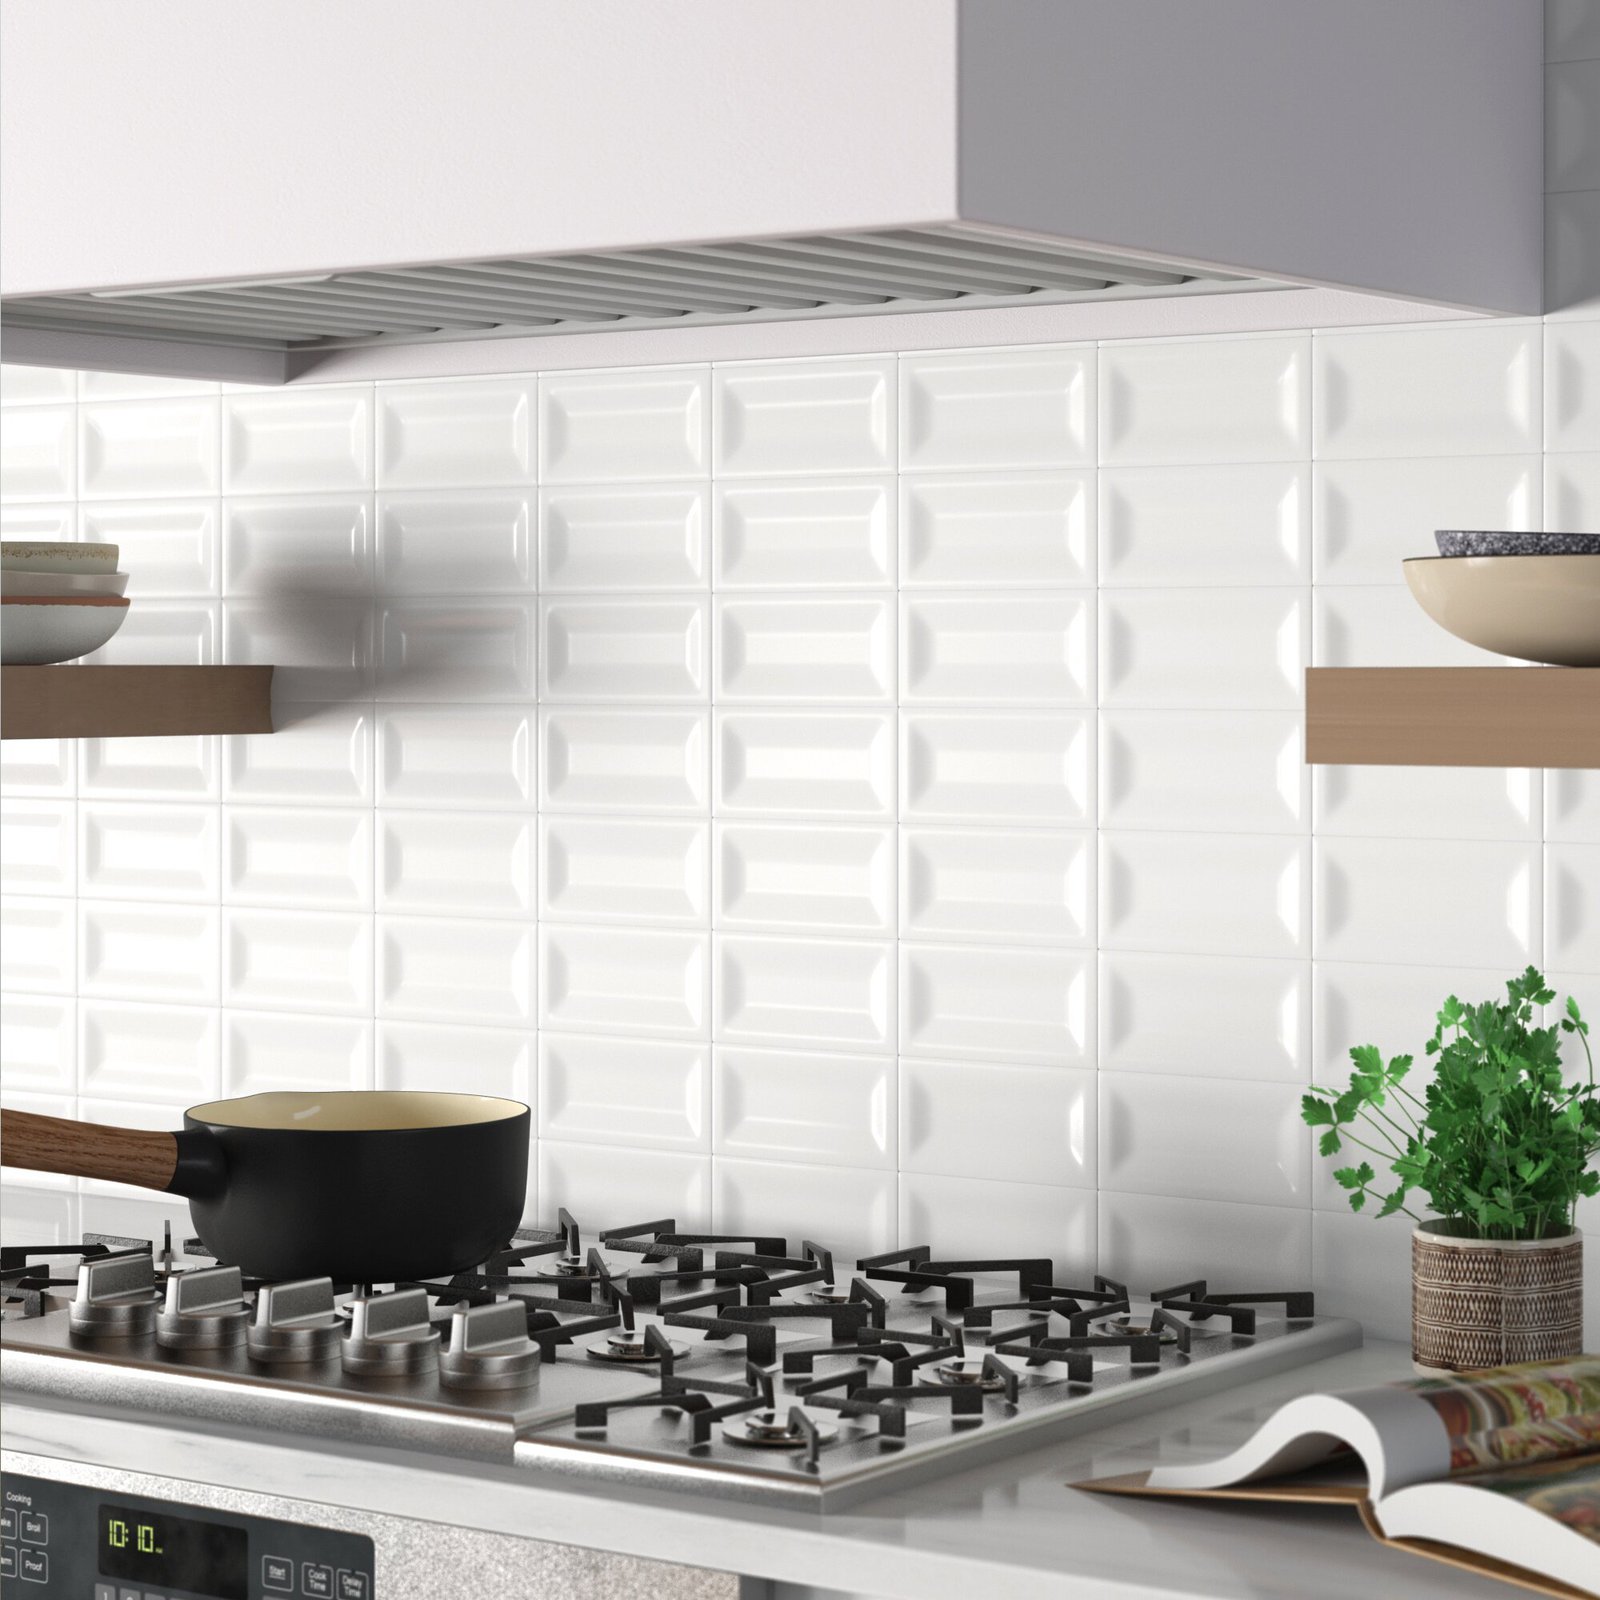 Lighten the Room with a White Glossy Tile